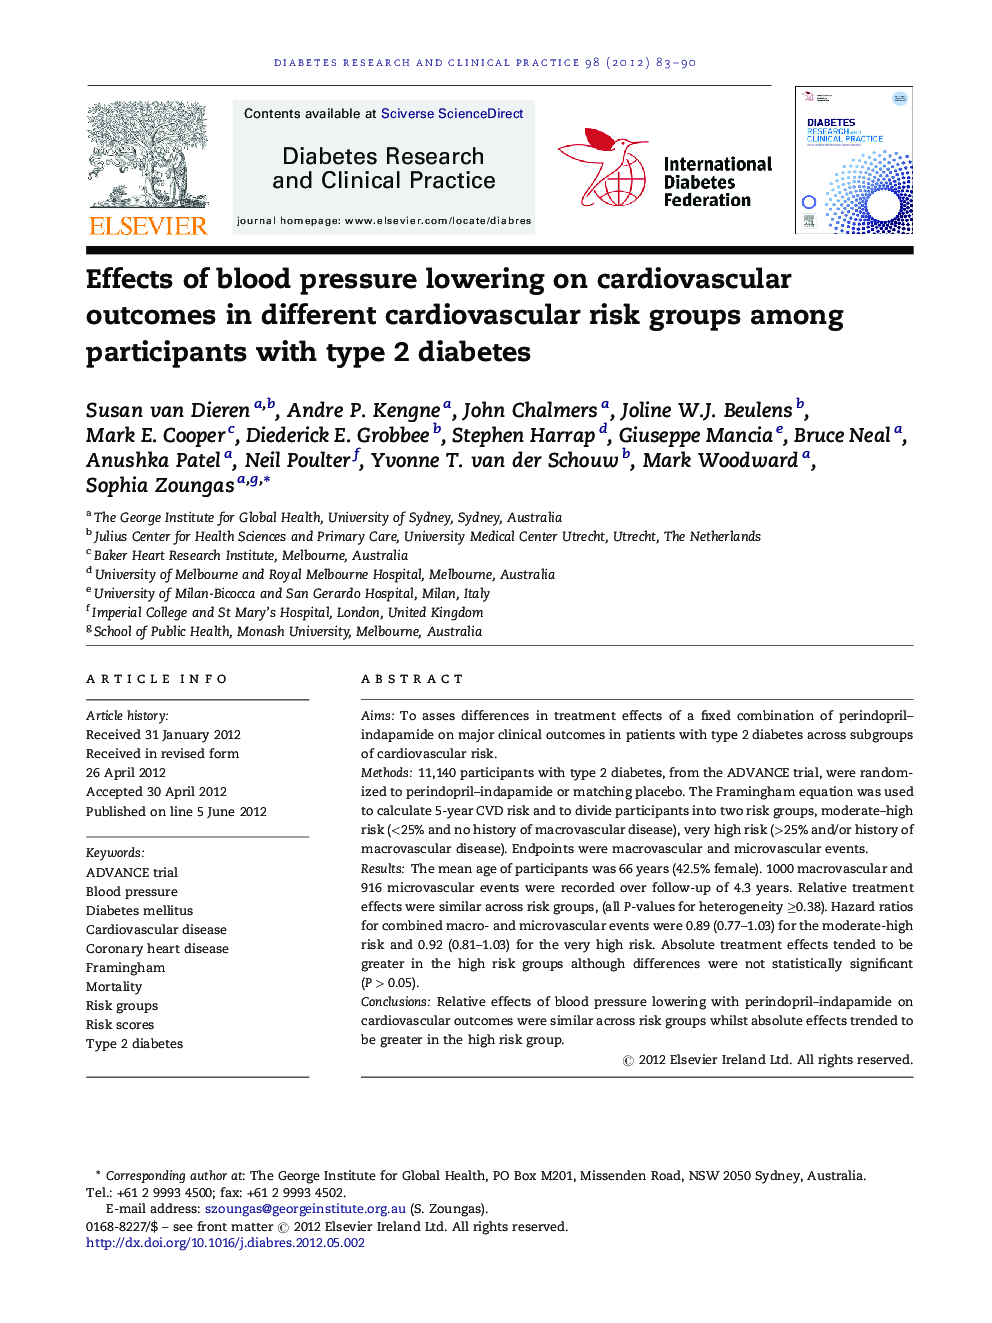 Effects of blood pressure lowering on cardiovascular outcomes in different cardiovascular risk groups among participants with type 2 diabetes